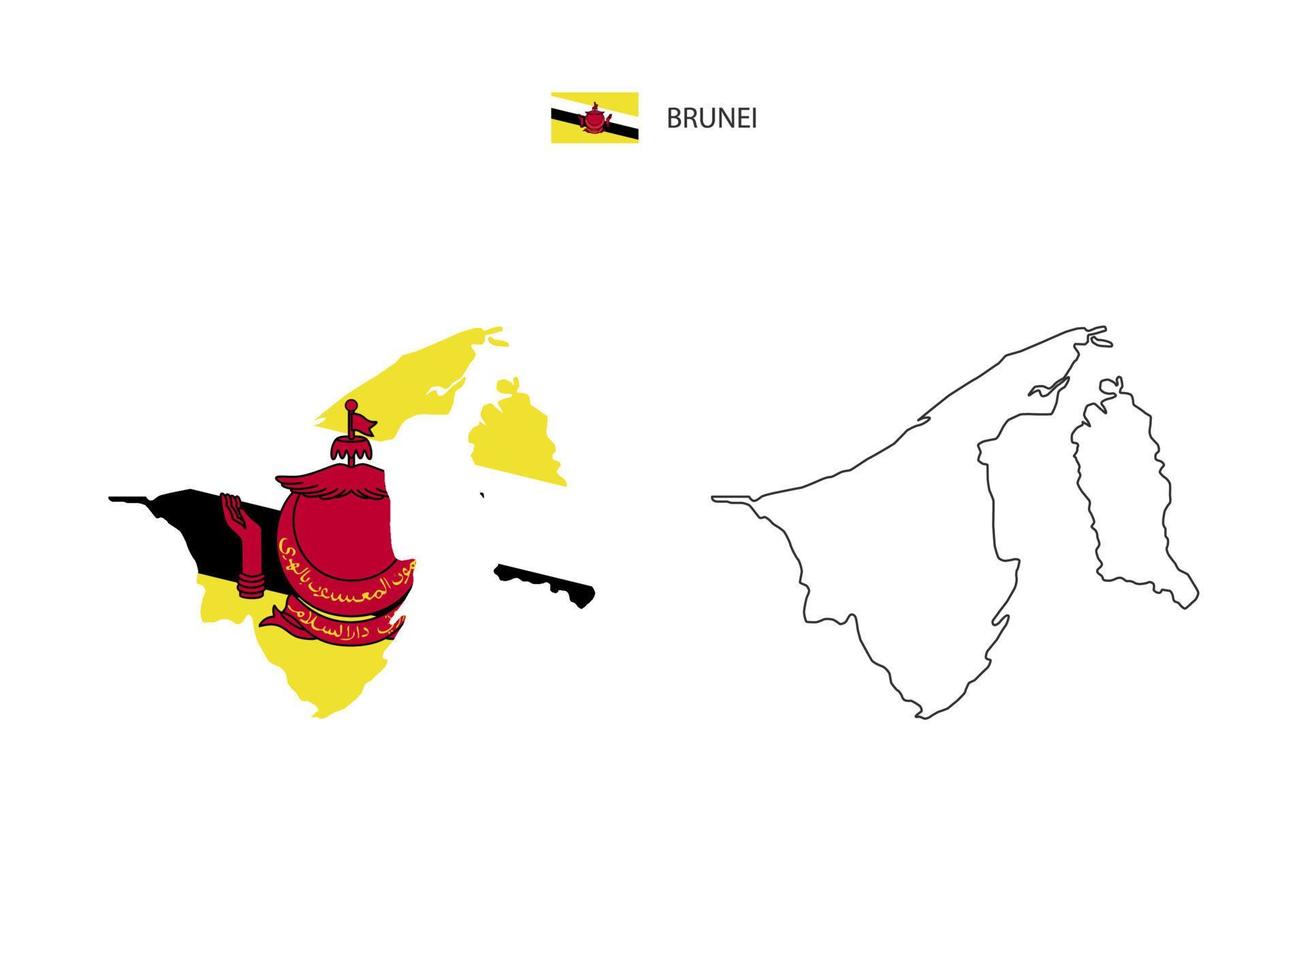 Brunei map city vector divided by outline simplicity style. Have 2 versions, black thin line version and color of country flag version. Both map were on the white background.